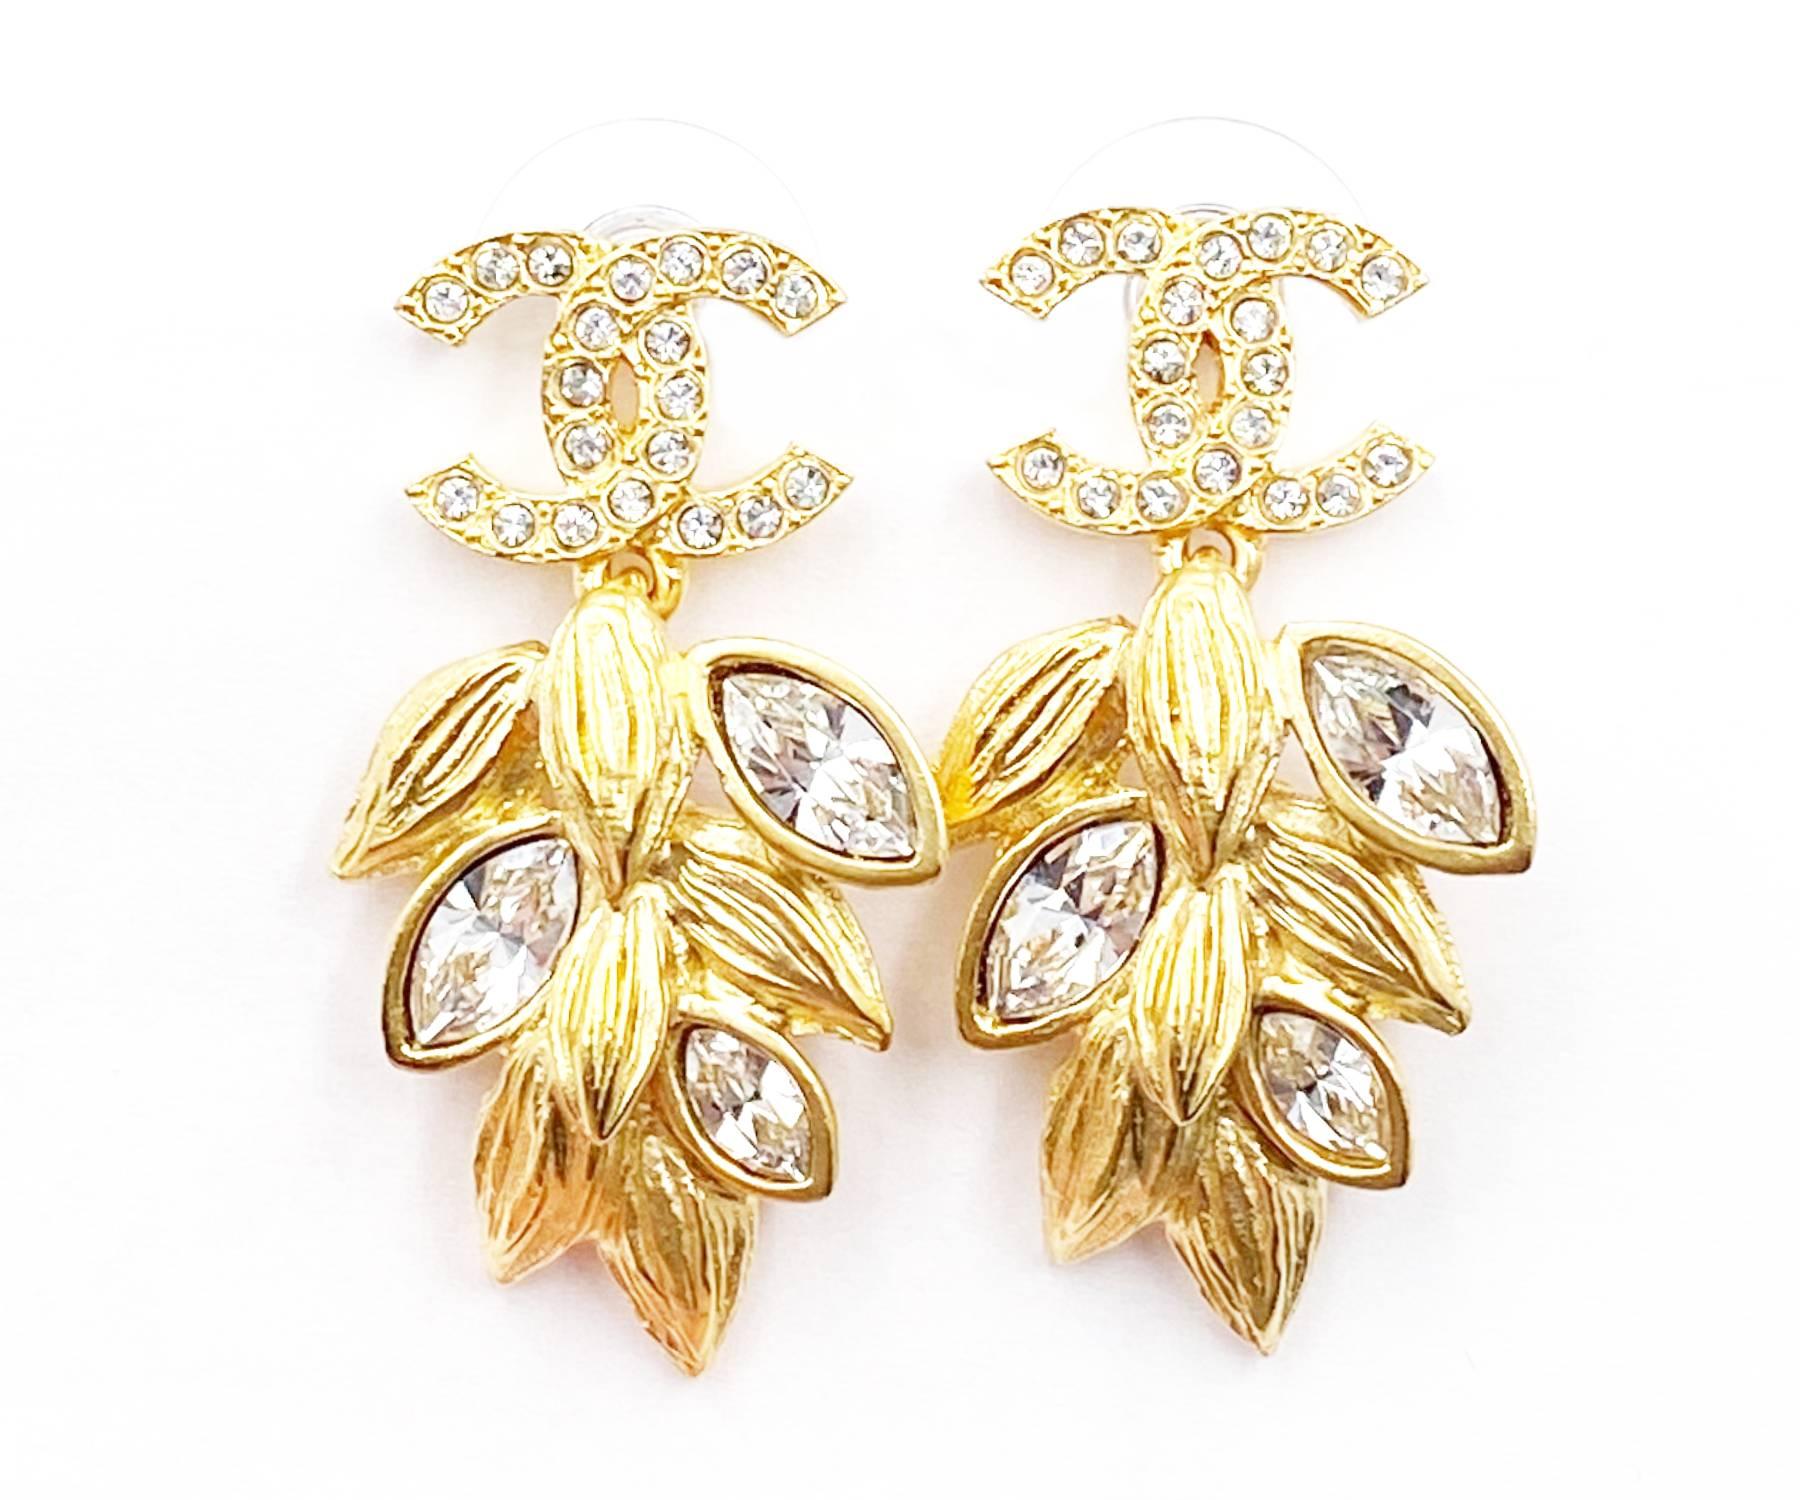 Chanel Brand New Gold CC Crystal Olive Leaf Dangle Piercing Earrings

*Marked 20
*Made in France
*Comes with original box, pouch, booklet, ribbon and camellia
*Brand new

-Approximately 0.75″ x 1.5″
-Very gorgeous and classic piece

10093-7290